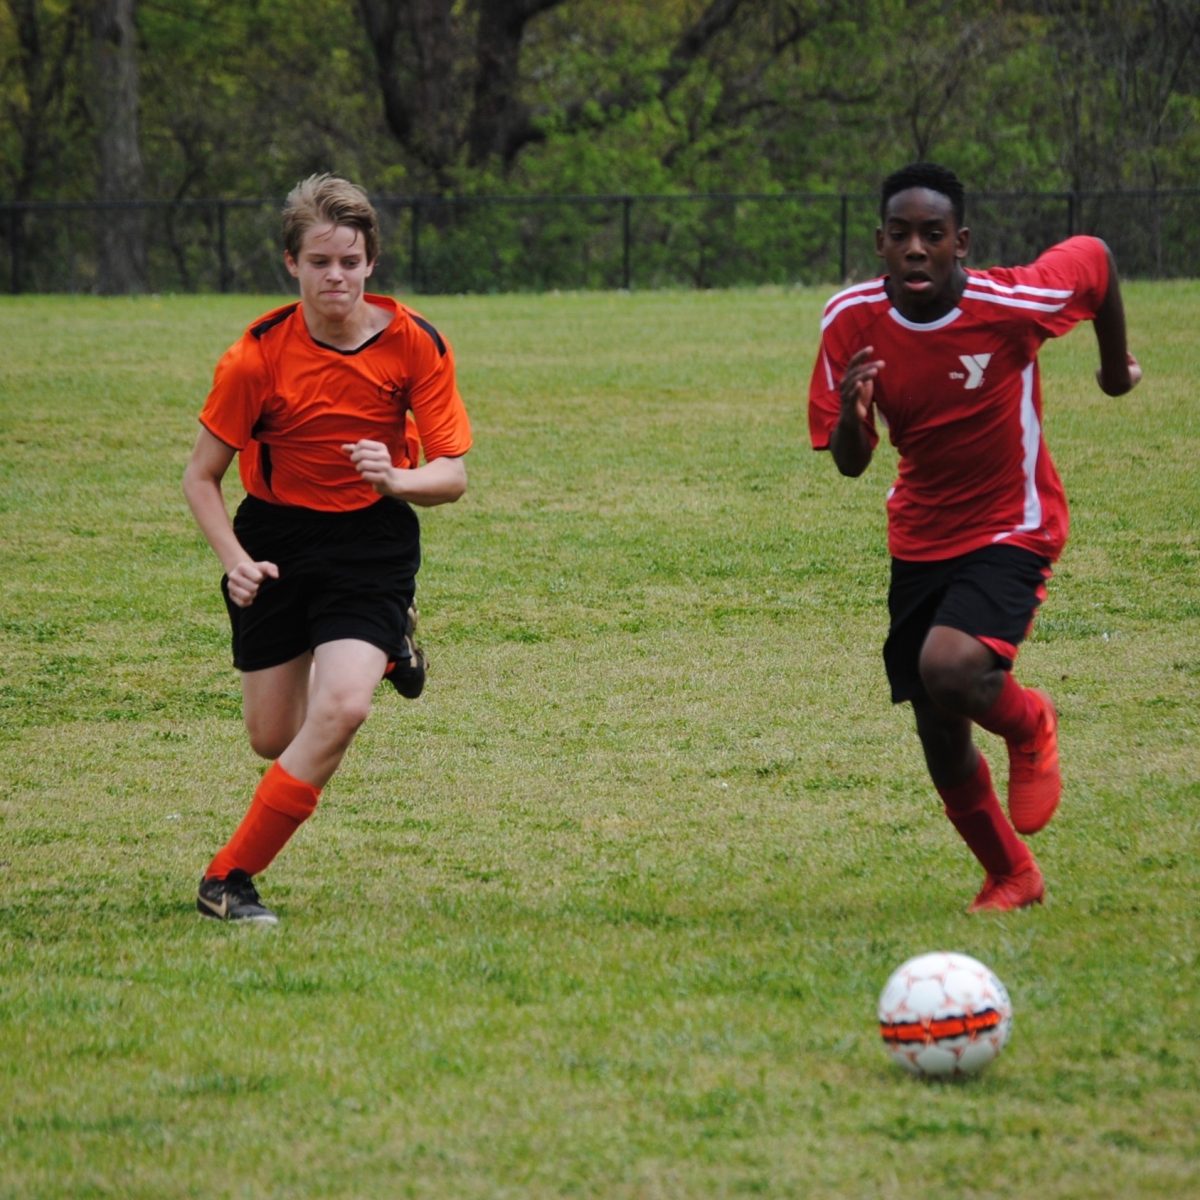 Tommy Beason 24 showing his toughest face as he attempts to beat his opponent to the ball in his rec-league, middle school soccer game (Kent Lineberger).